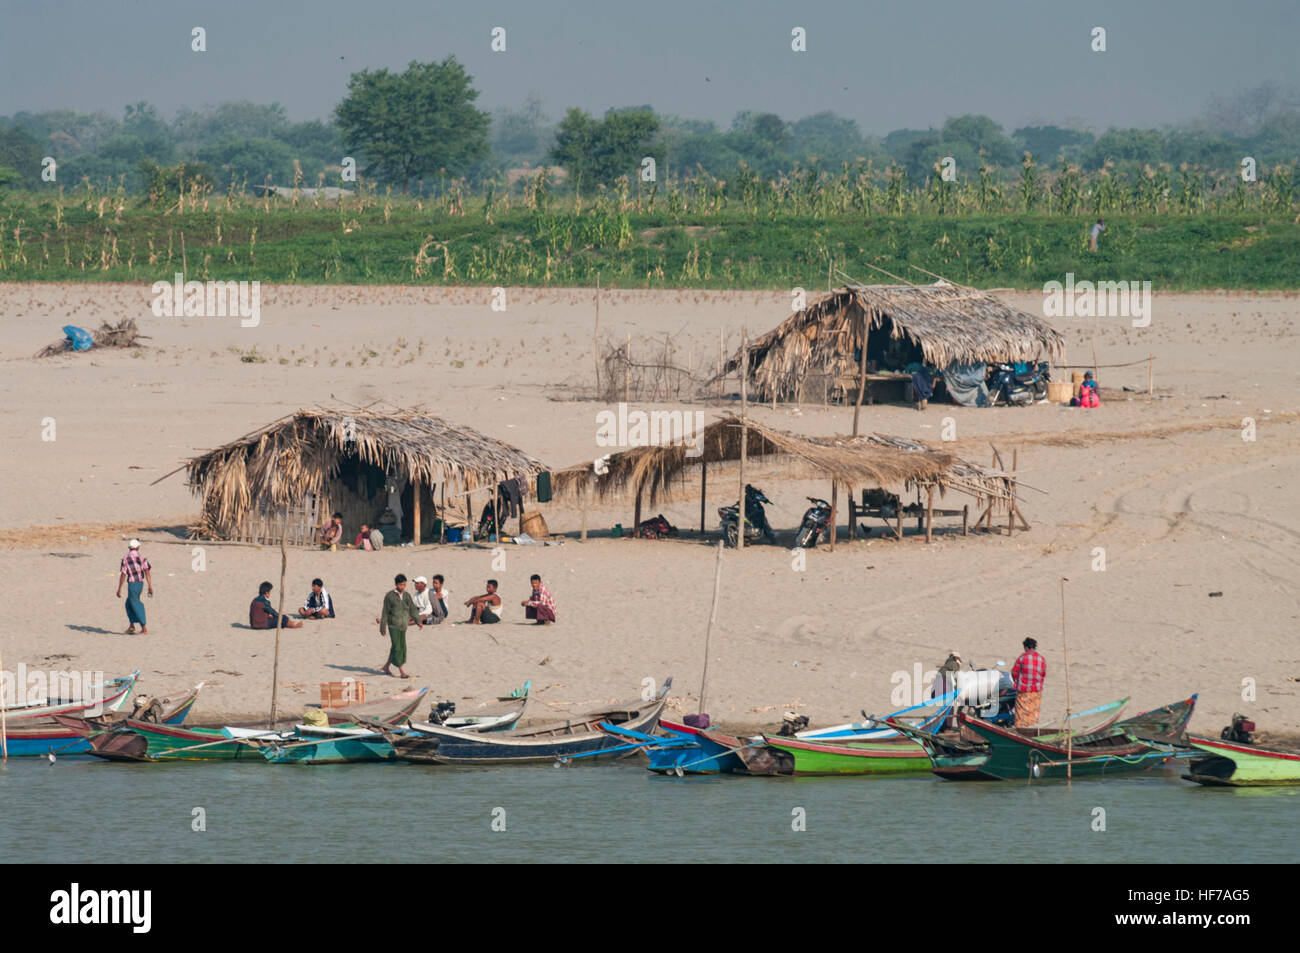 People living on the sandy banks of the Irrawaddy river in Myanmar (Burma). Stock Photo